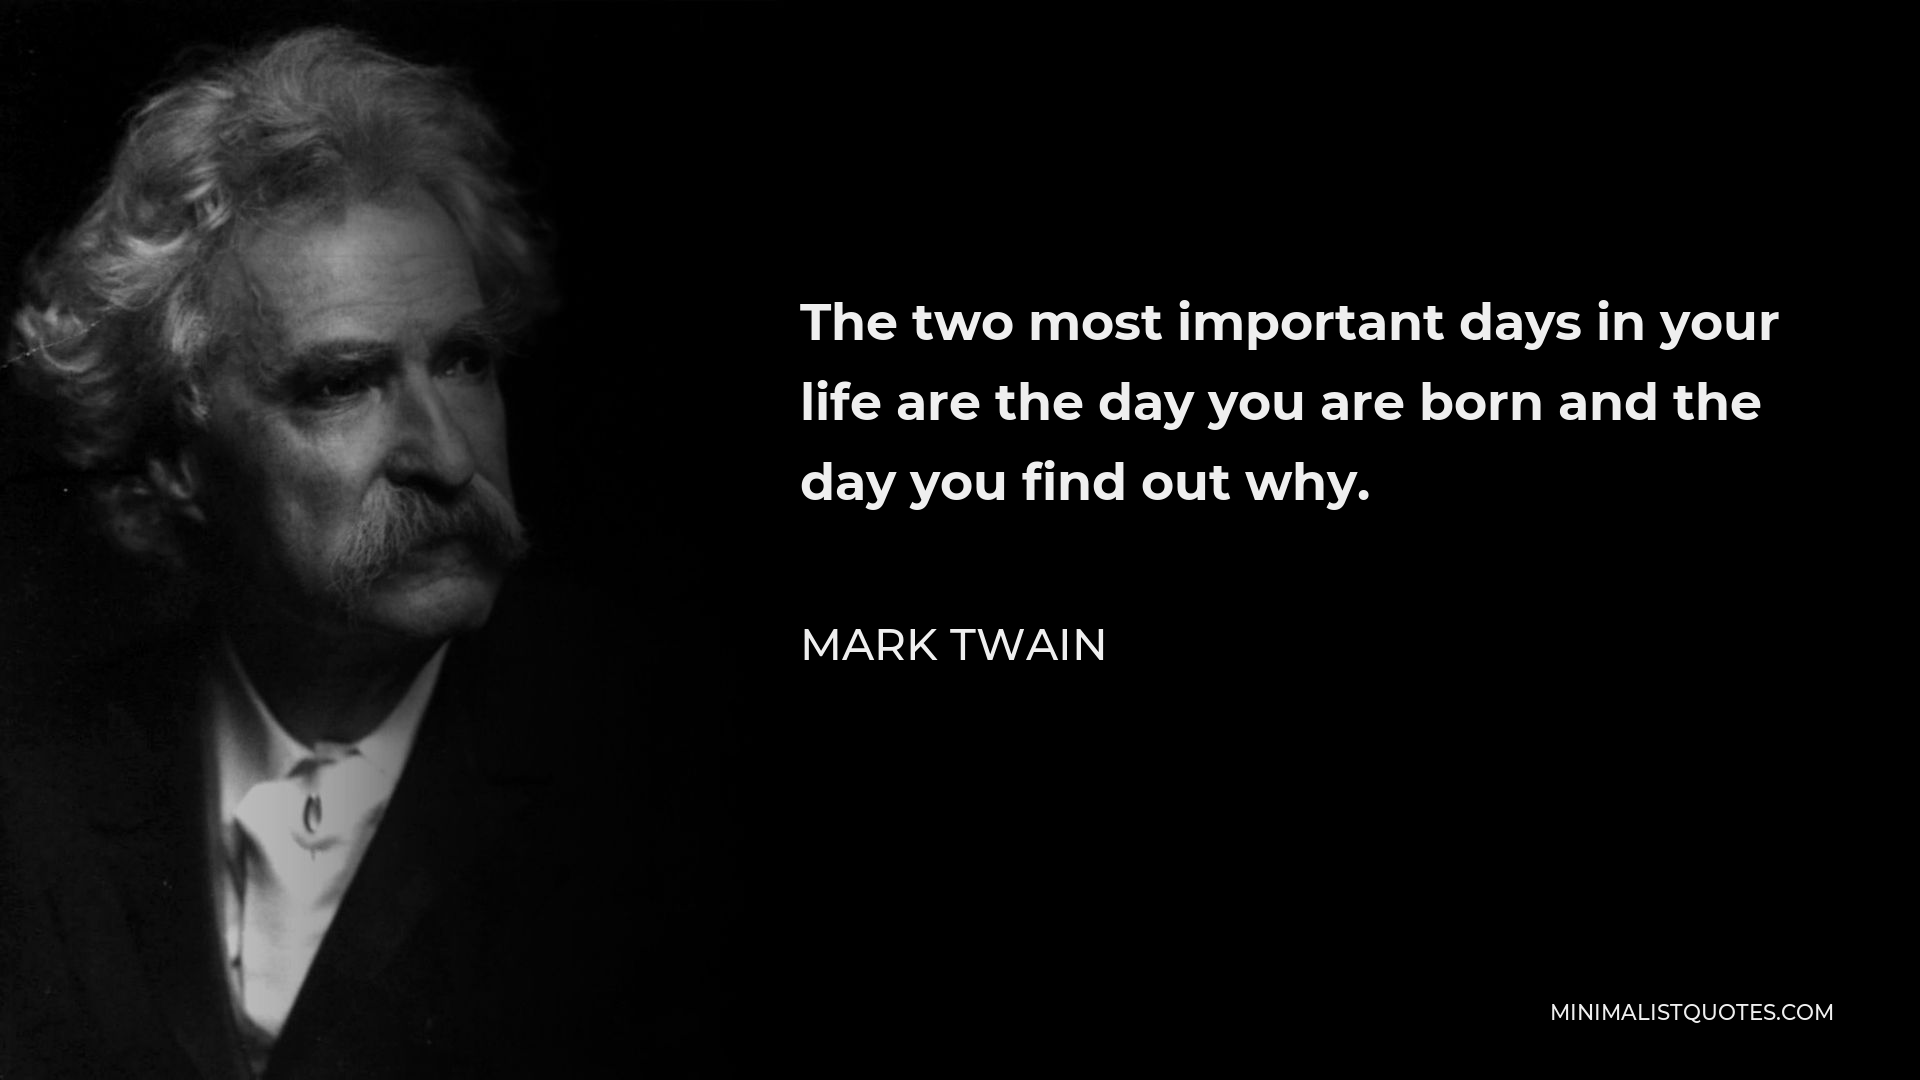 Mark Twain Quote - The two most important days in your life are the day you are born and the day you find out why.